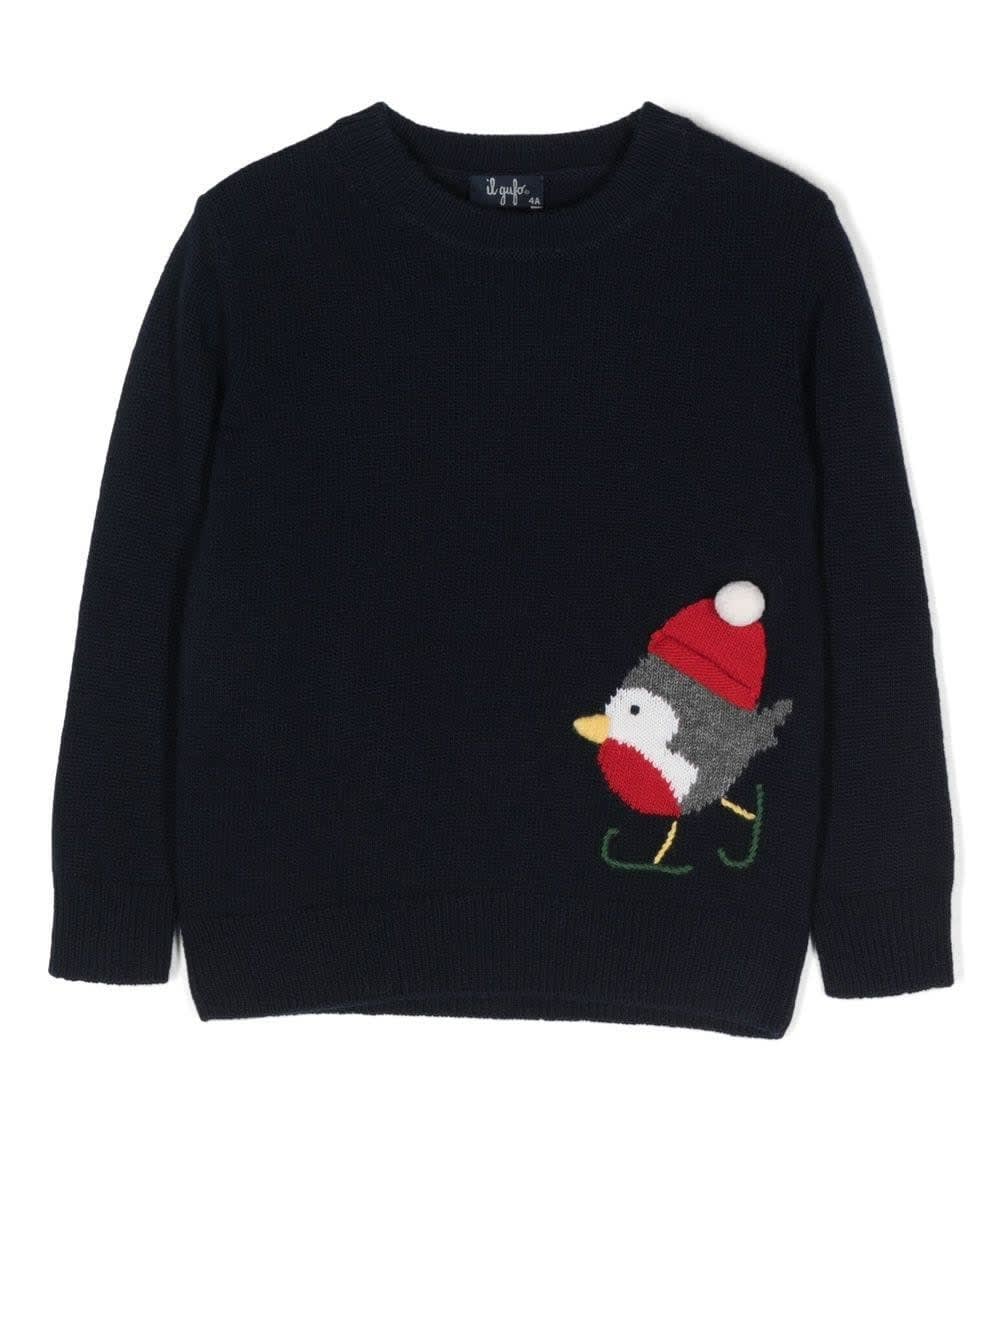 IL GUFO BABY SWEATER IN NAVY BLUE WOOL WITH CHRISTMAS ROBIN